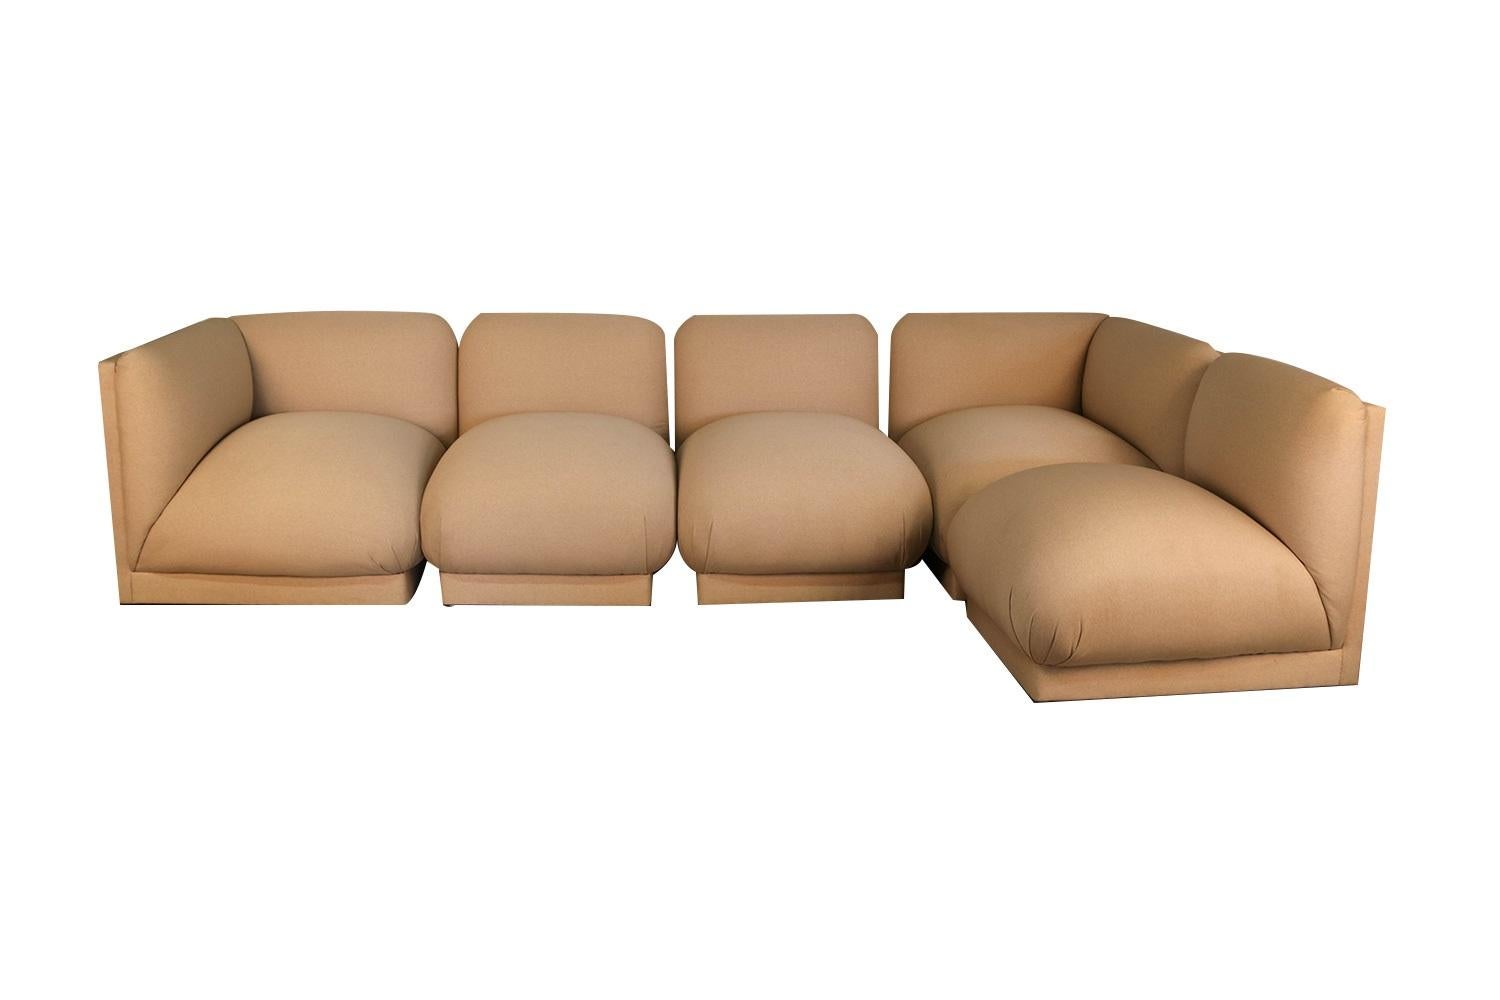 A stunning Mid-Century Modern five-piece modular sectional sofa by John Mascheroni for Swaim Originals, circa 1970s. An iconic piece of furniture that has remained in a single collection since it was acquired by the prior owner, and the original